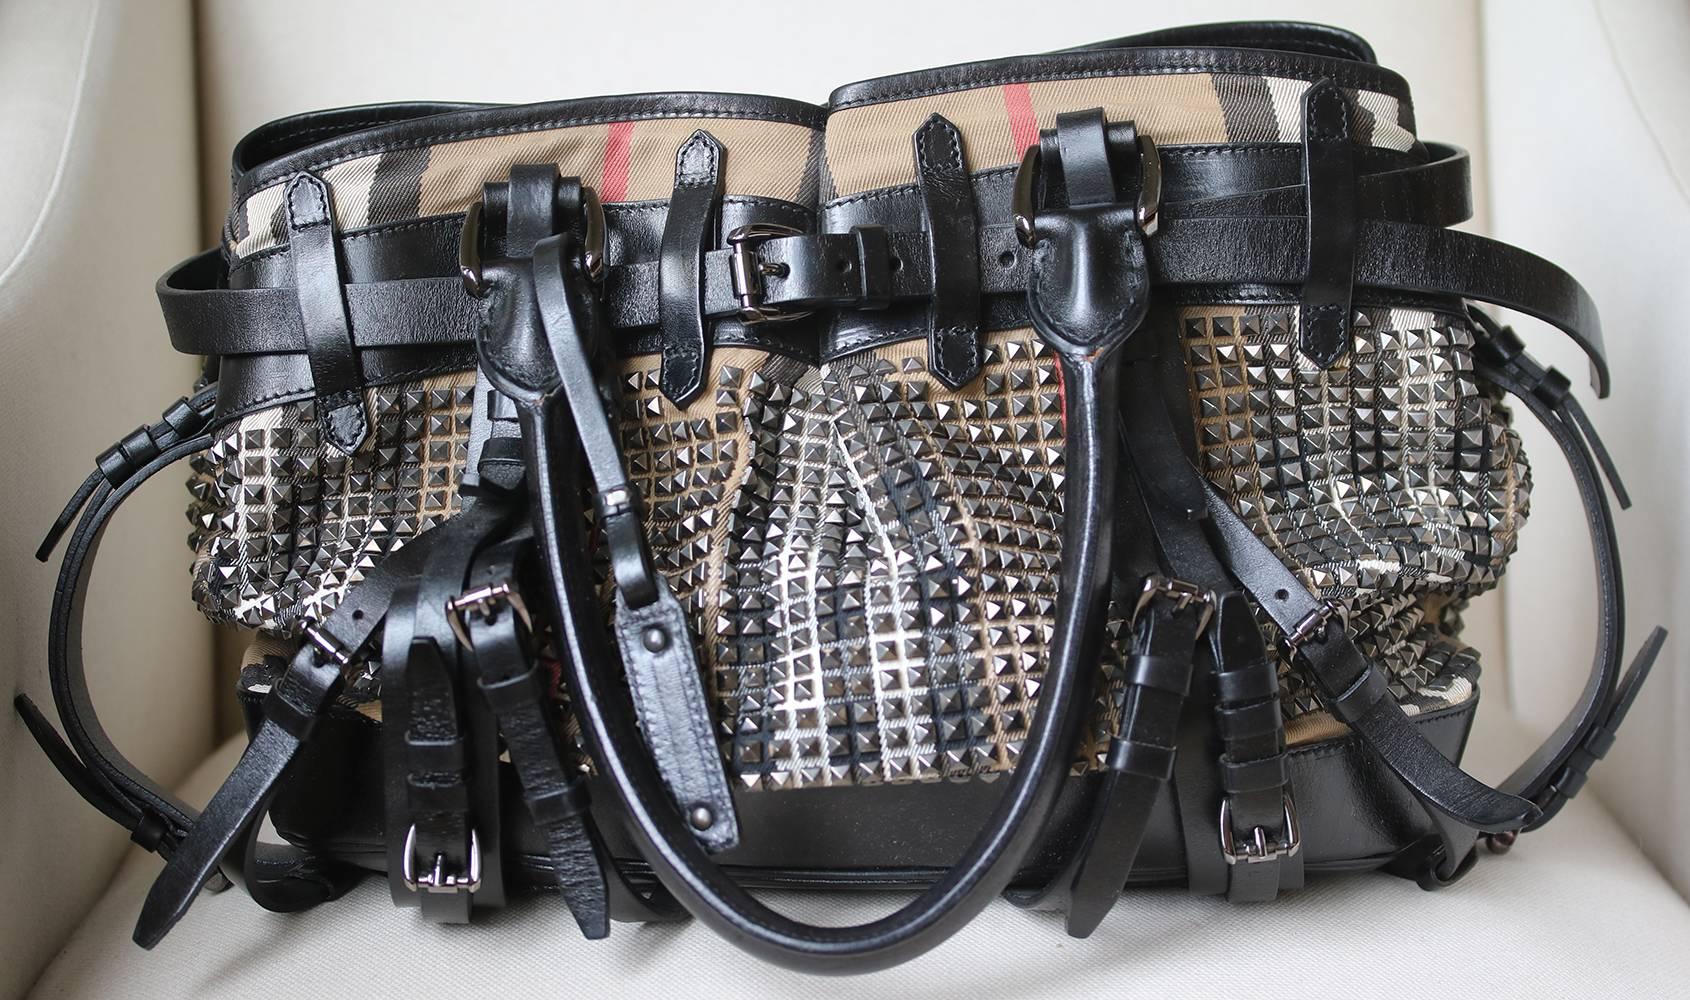 Rather Large Sized Bag Crafted In Canvas With The Welknown Burberry Check In Beige, Black, White And Red, Covered With Hundreds Of Silver-Tone Studs. Combined With Black Leather, Numerous Decorative Leather Straps At The Front Plus A Burberry Logo